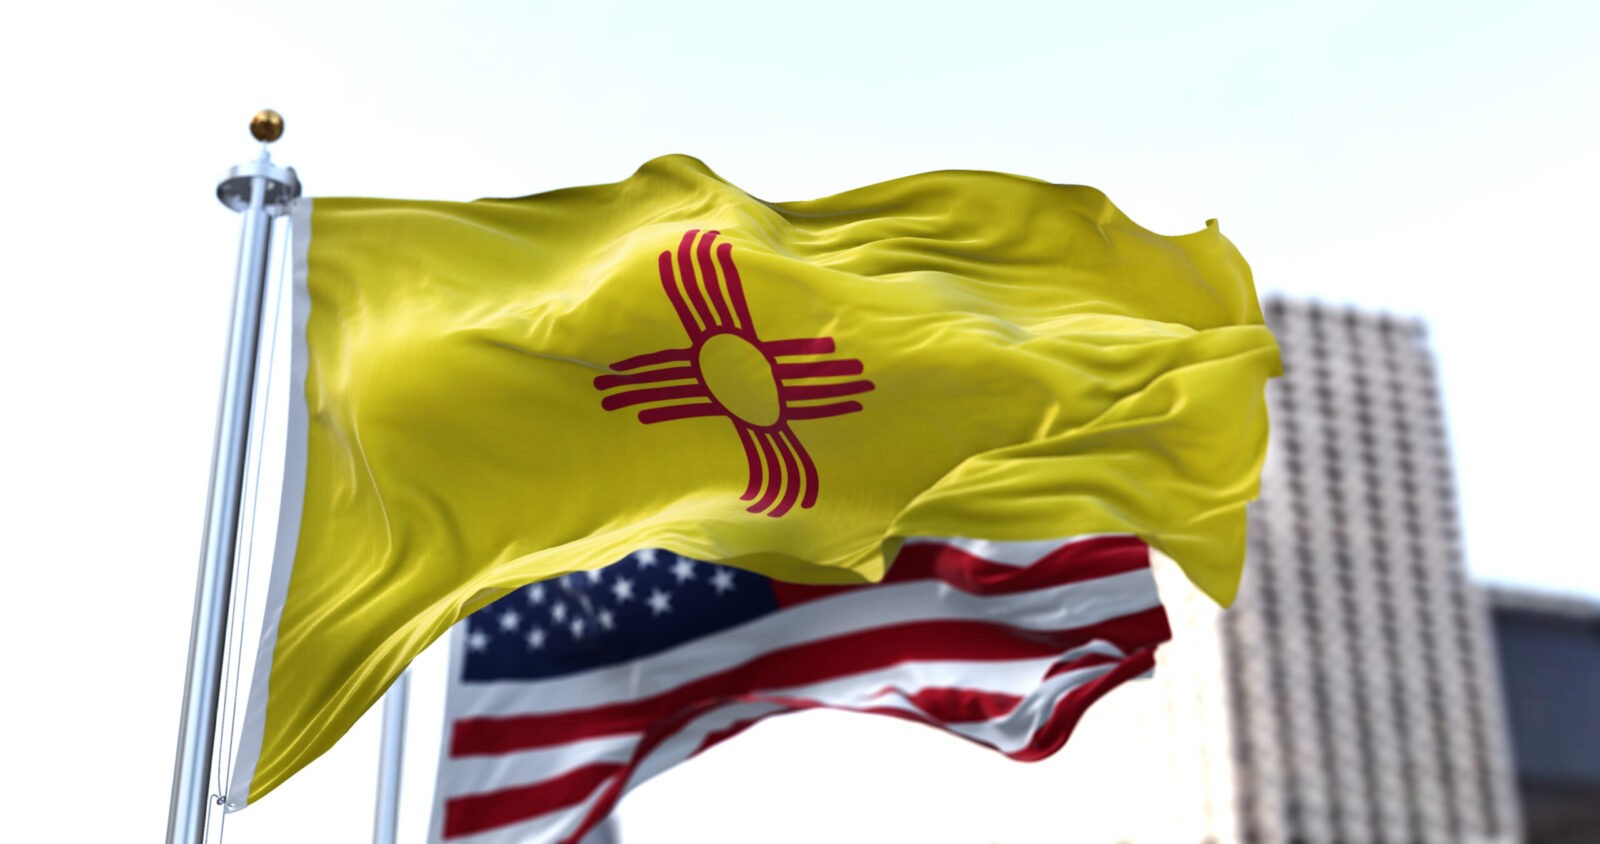 the flag of the US state of New Mexico waving in the wind